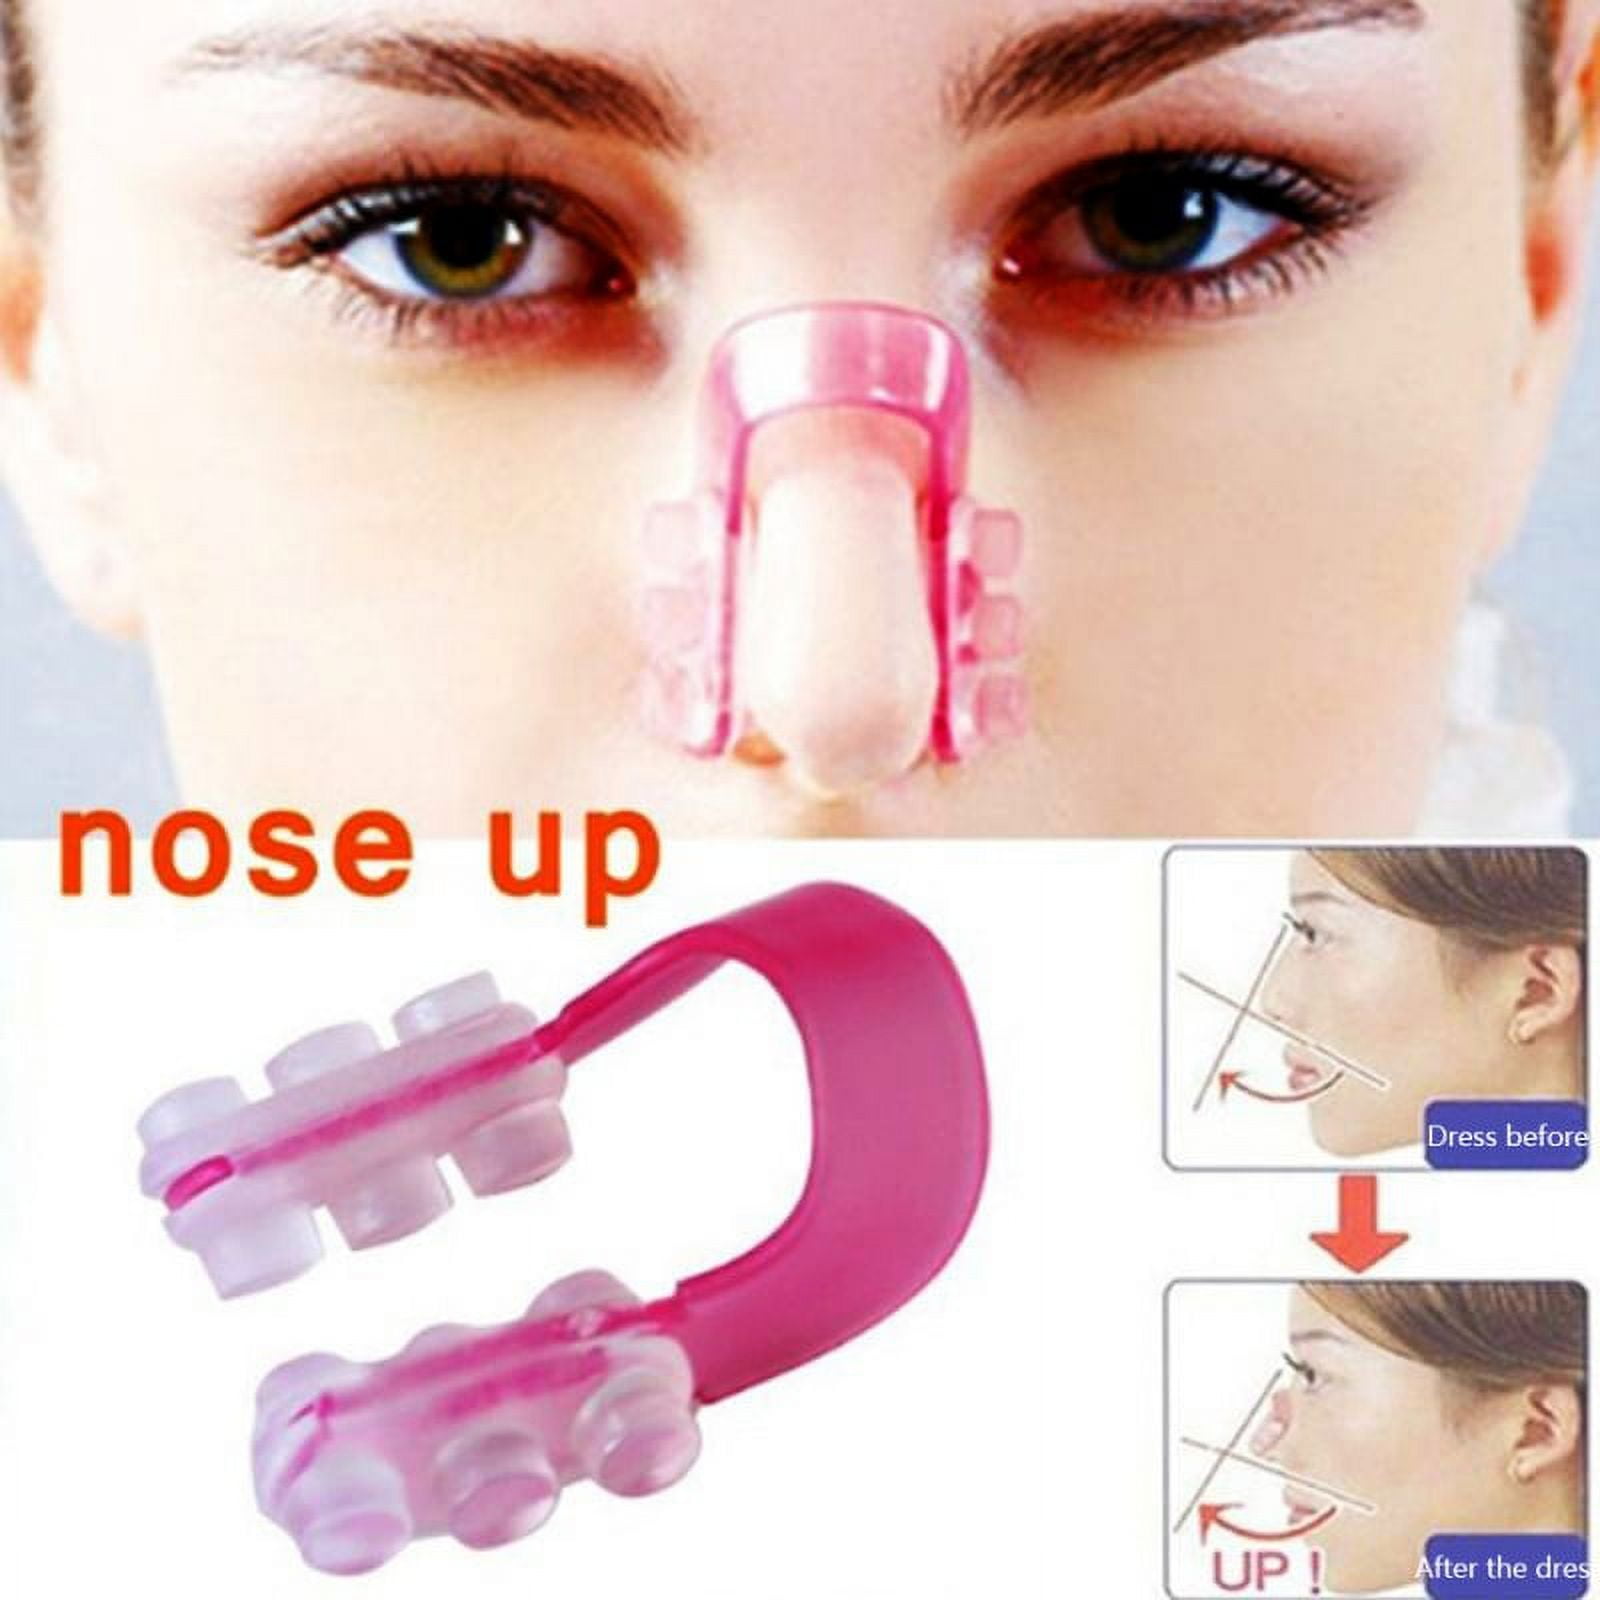 Kritne Nose Up Shaping, Nose Up Shaping Lifting Straightening Clip Bridge  Beauty Enhancer Reshaper White, Nose Up Shaper